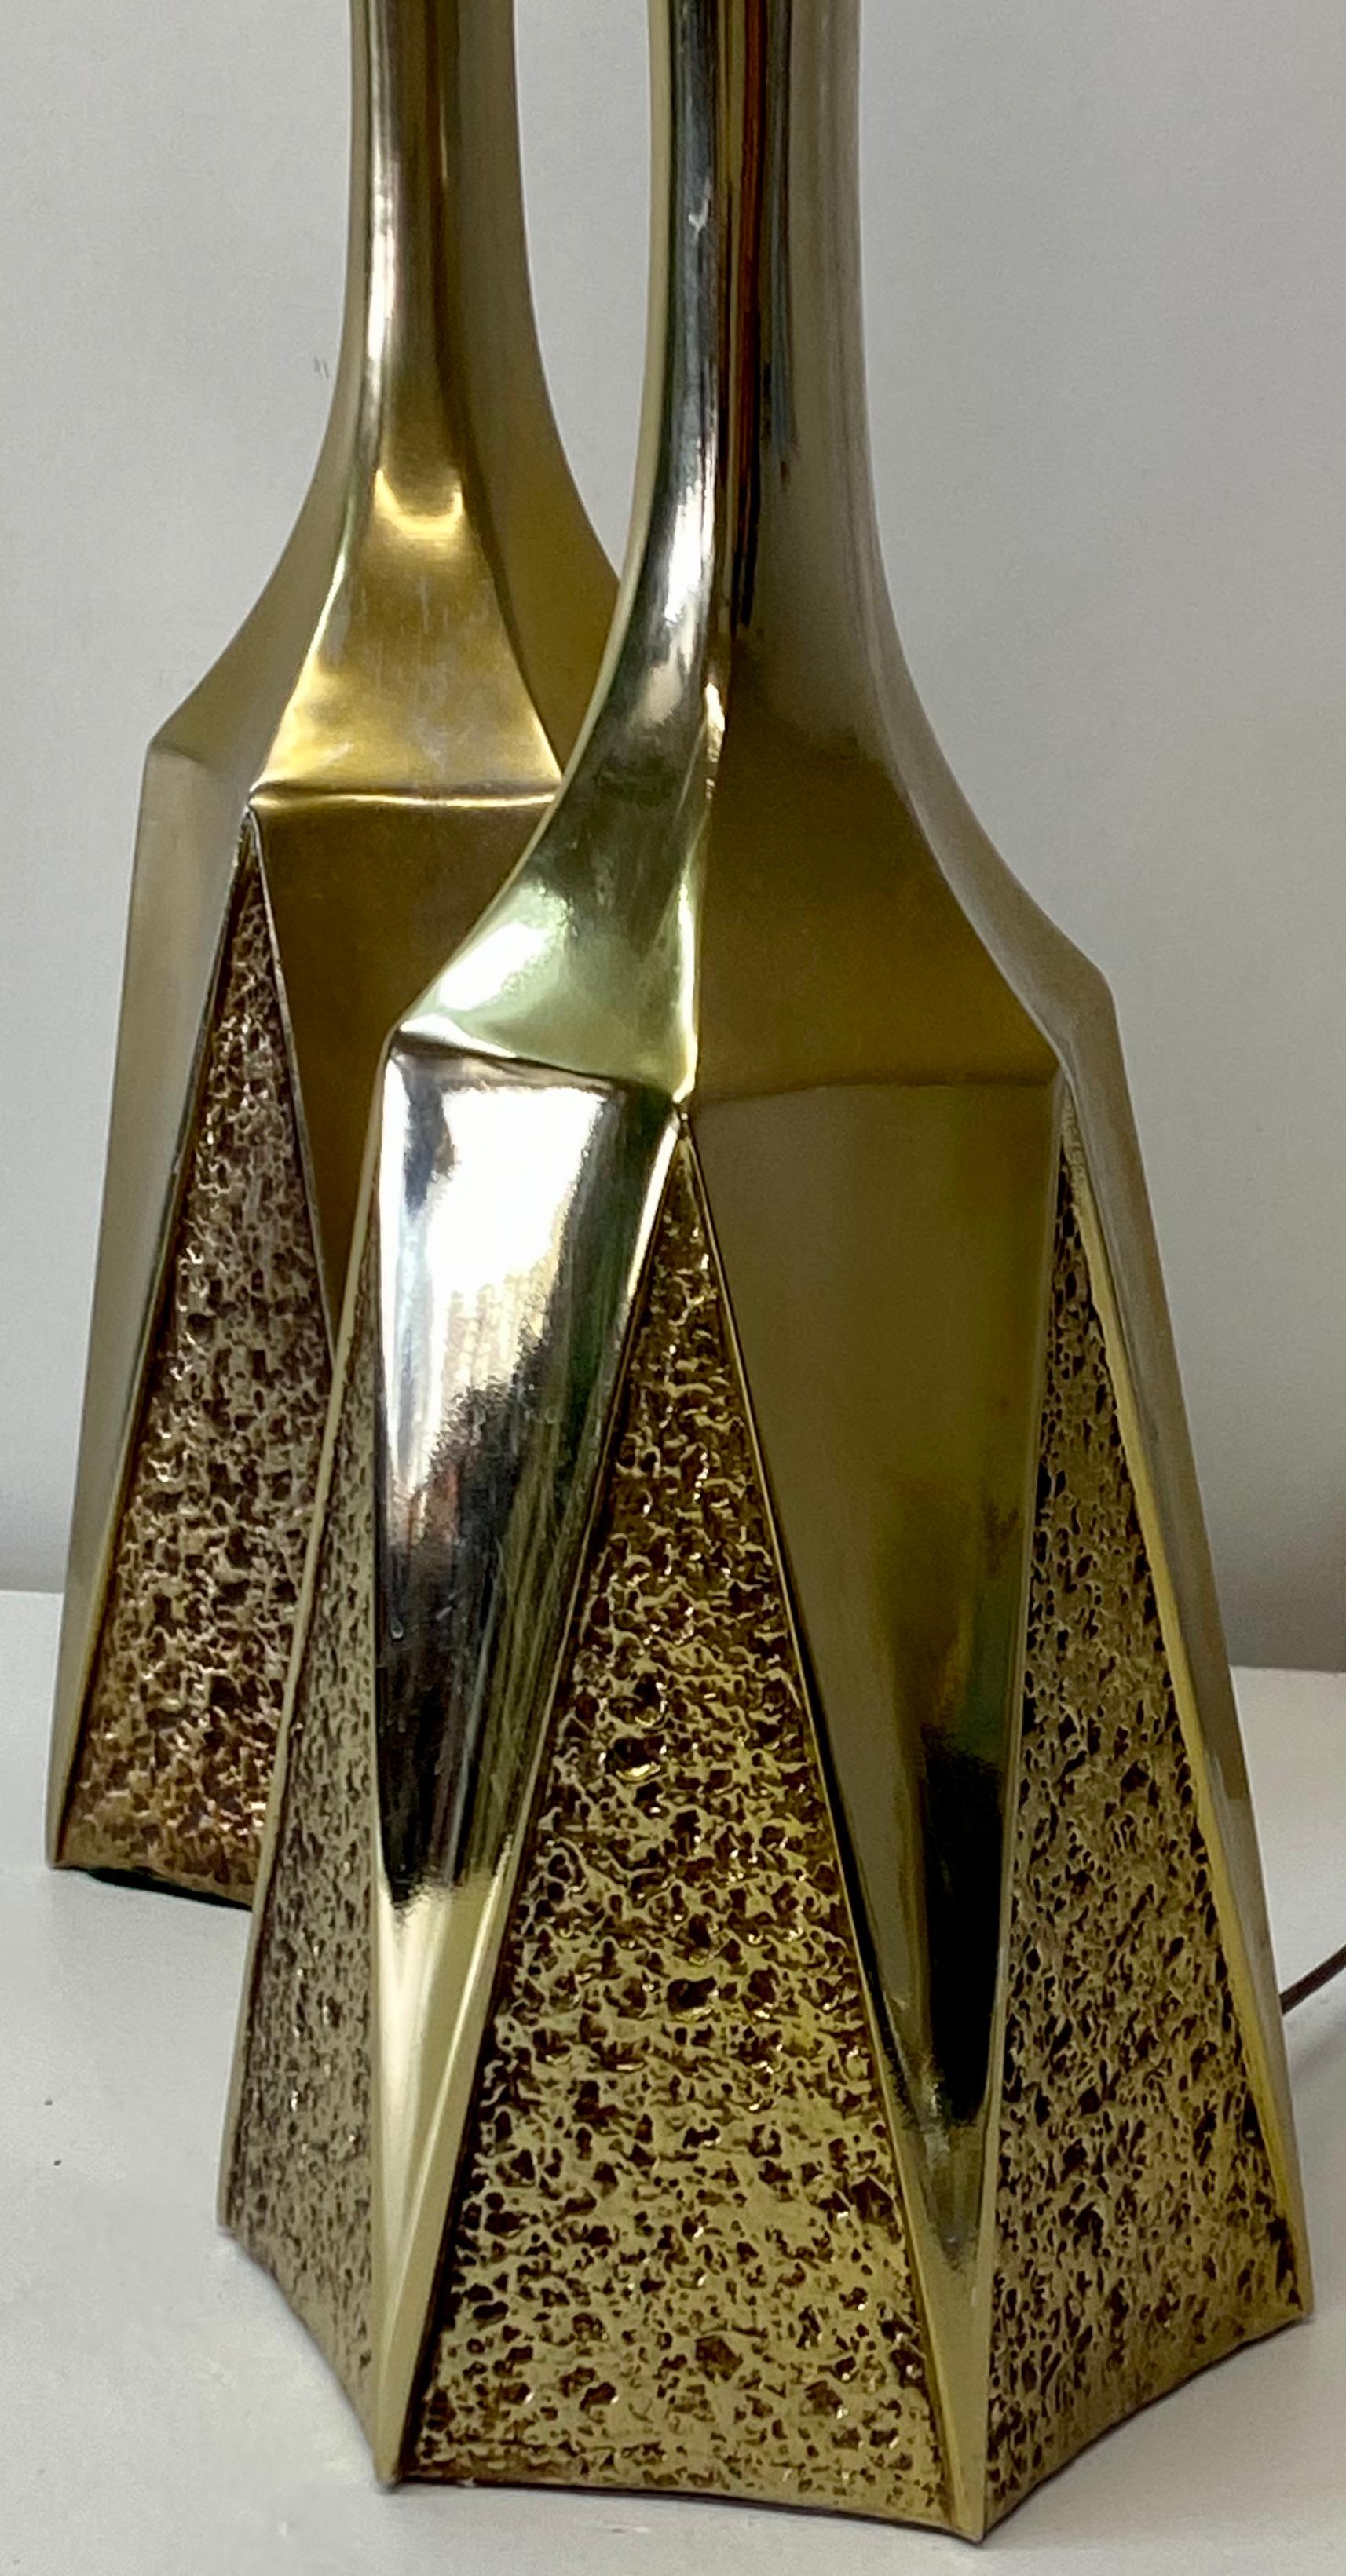 Plated Mid 20th Century Plate Brass Table Lamps by Laurel Lamp Co., C.1950s For Sale